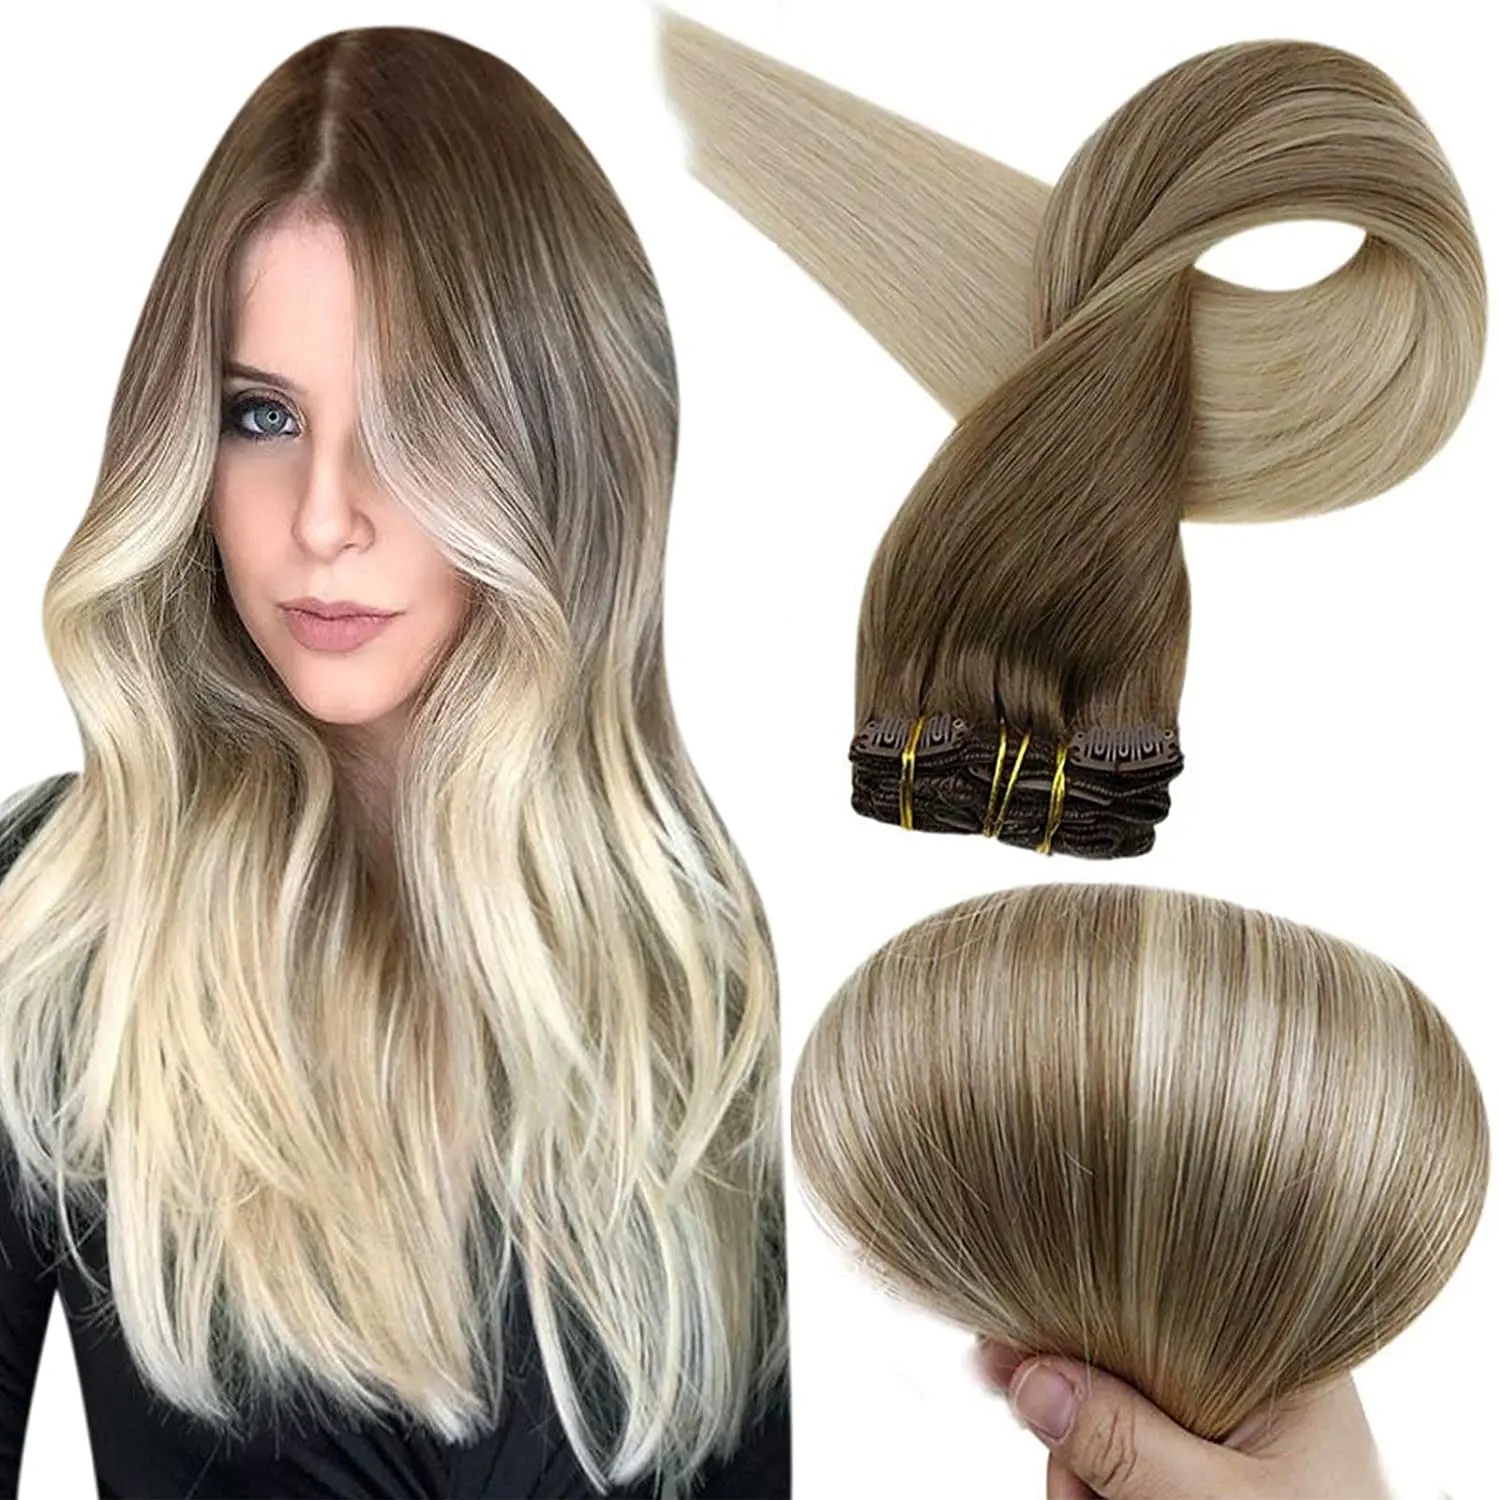 

Full Shine Clip In Human Hair Extensions Balayage Ombre Blonde Black Hairpins 7pcs 120g Double Weft 100% Machine Remy For Woman